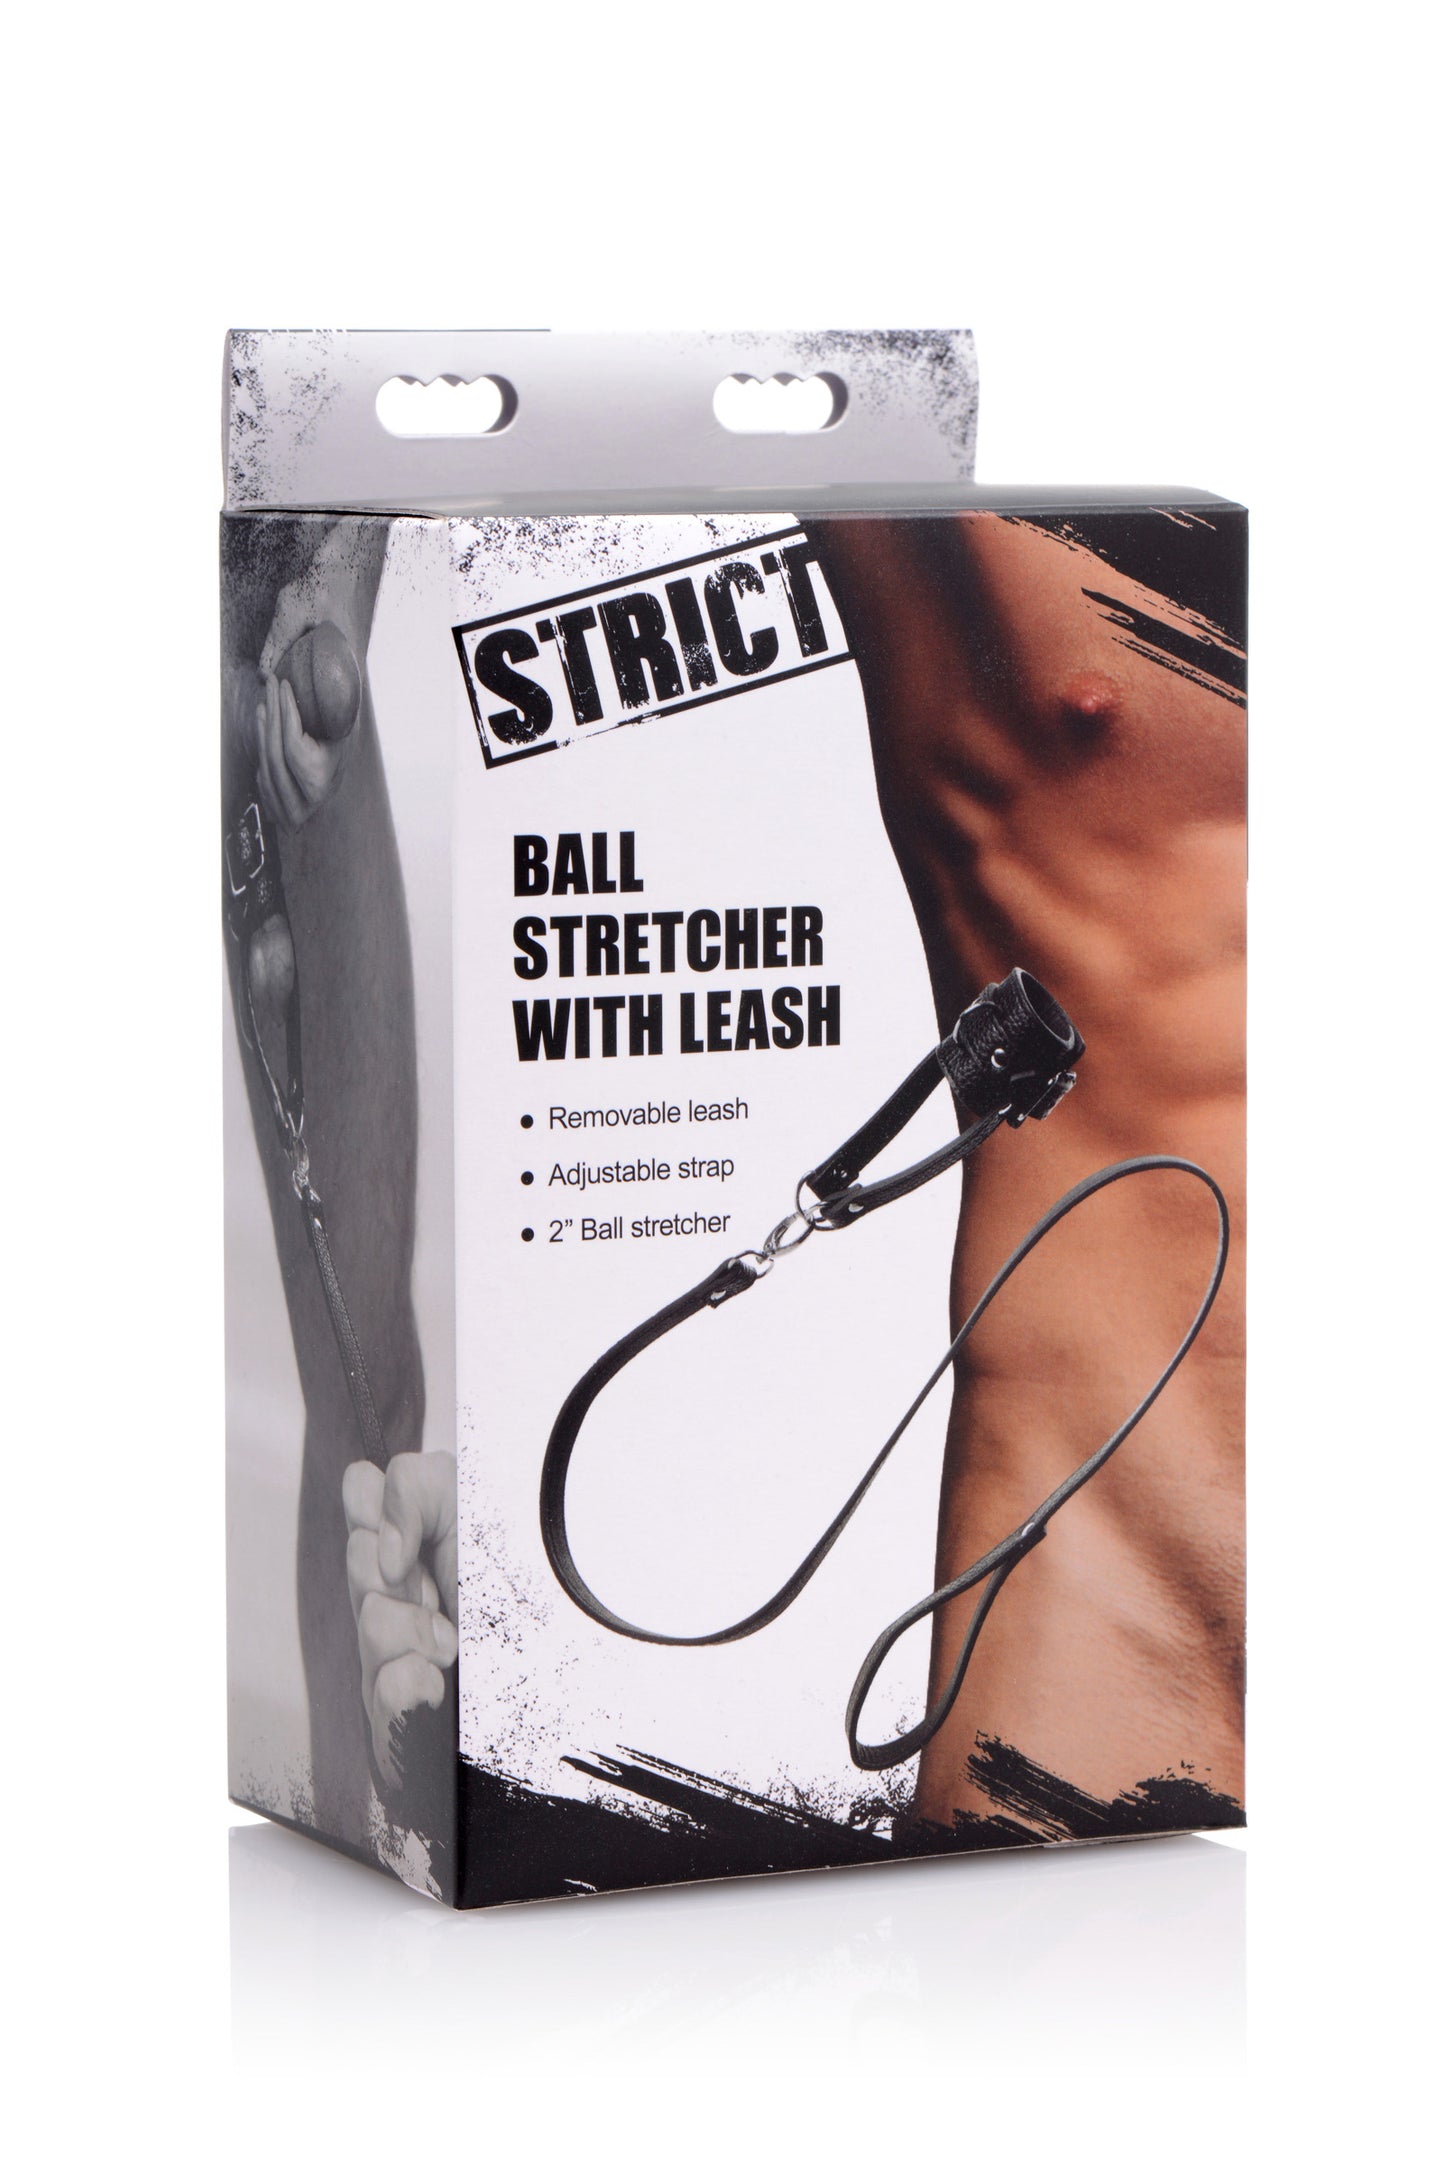 Strict Ball Stretcher With Leash - Just for you desires